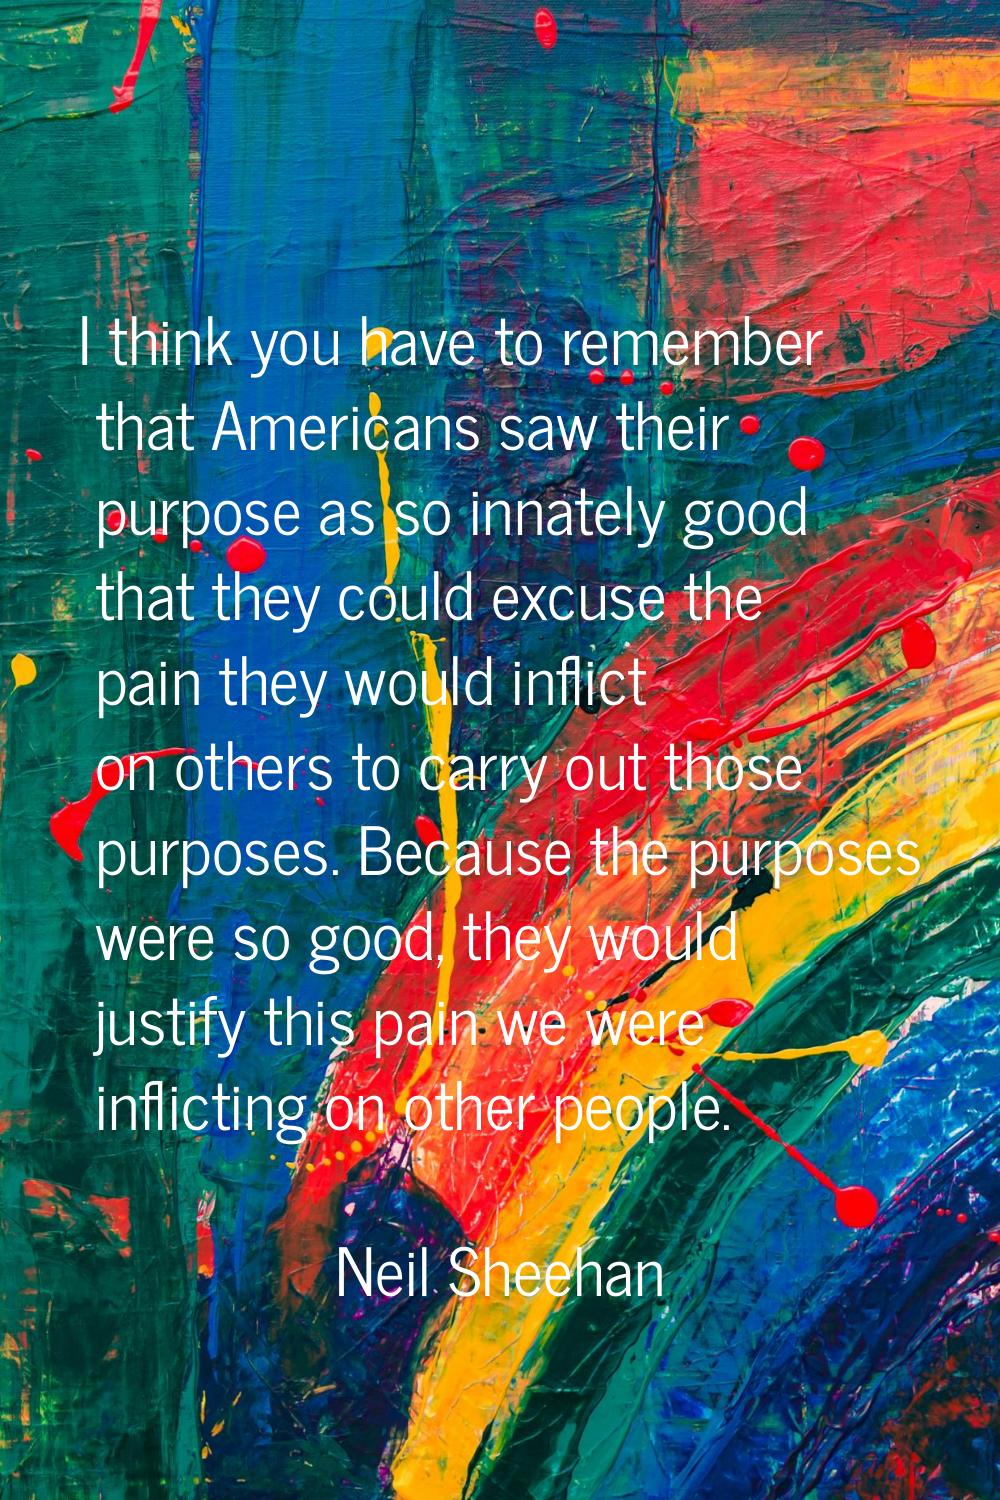 I think you have to remember that Americans saw their purpose as so innately good that they could e